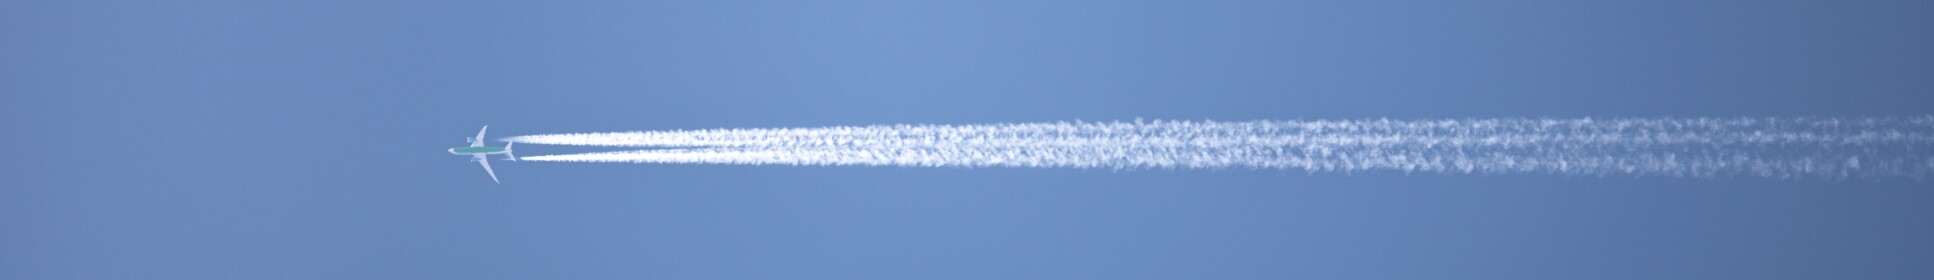 A plane with contrails behind it